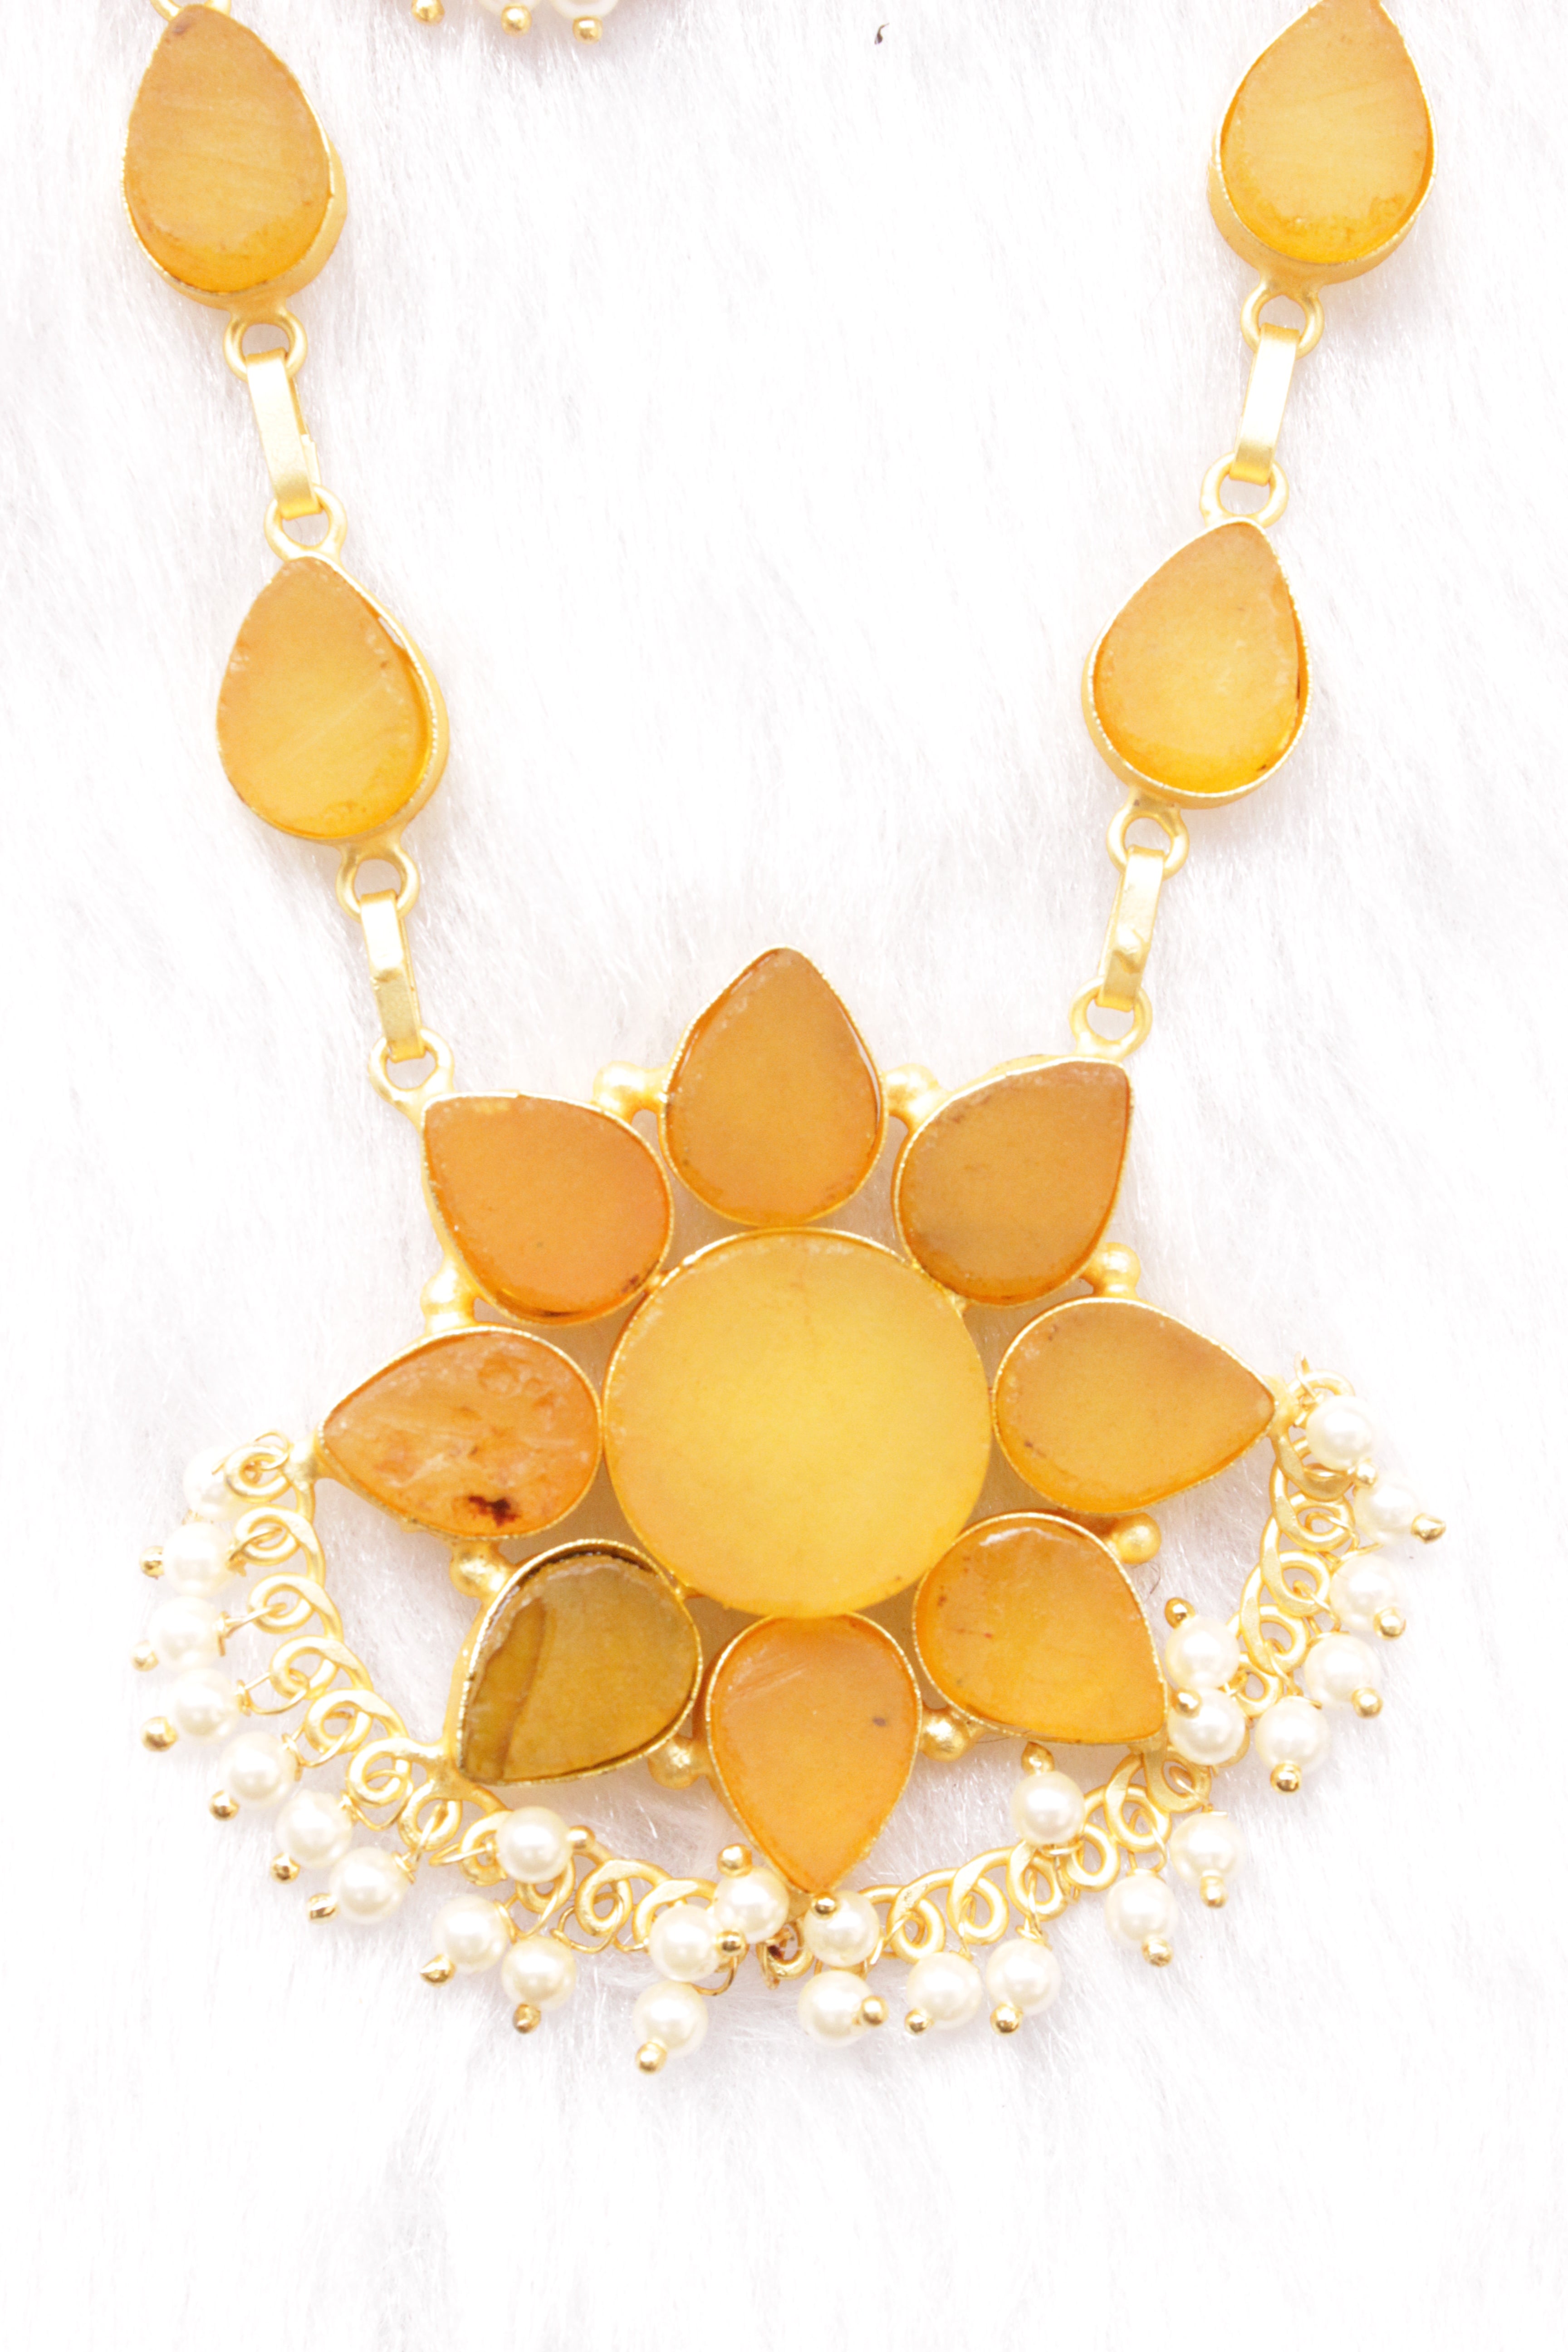 Tuscany Yellow Raw Natural Glass Stones Embedded Gold Toned Adjustable Length Necklace Set